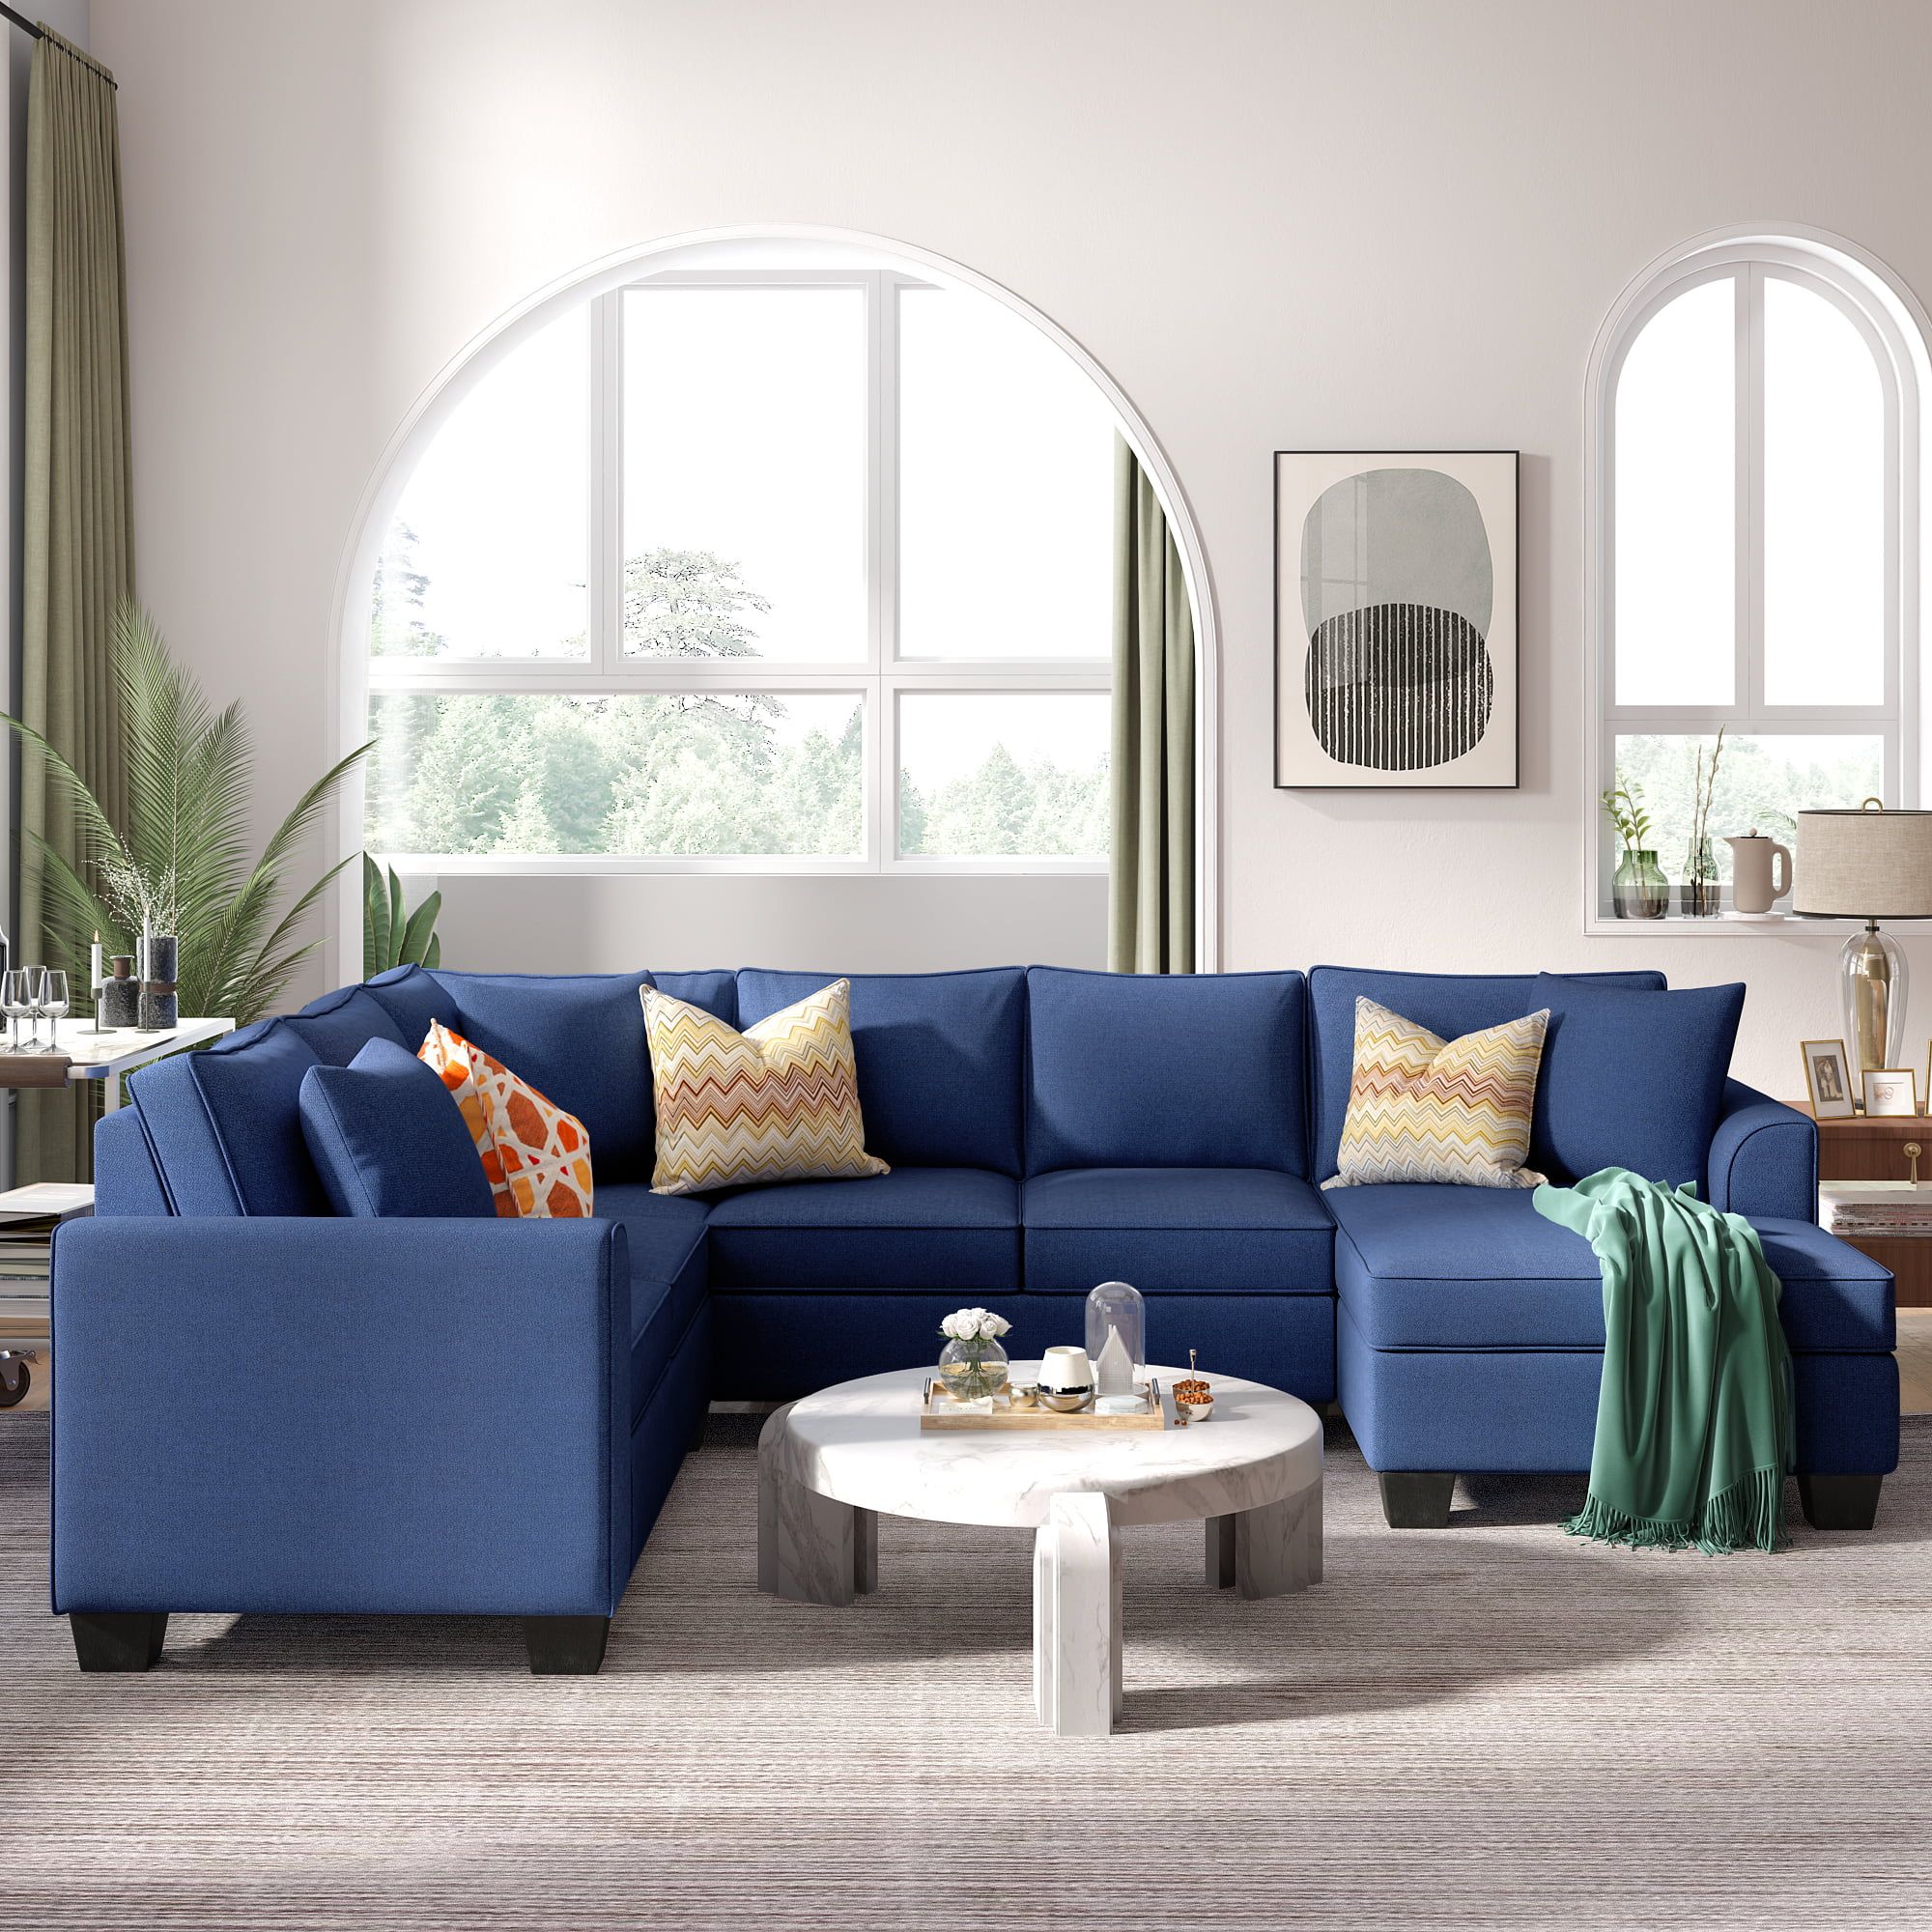 7 Seater Sectional Sofa Sets, Upholstered Modern U Shaped Sofa With 3  Pillows For Living Room, Blue – Walmart Intended For 7 Seater Sectional Couch With Ottoman And 3 Pillows (View 14 of 15)